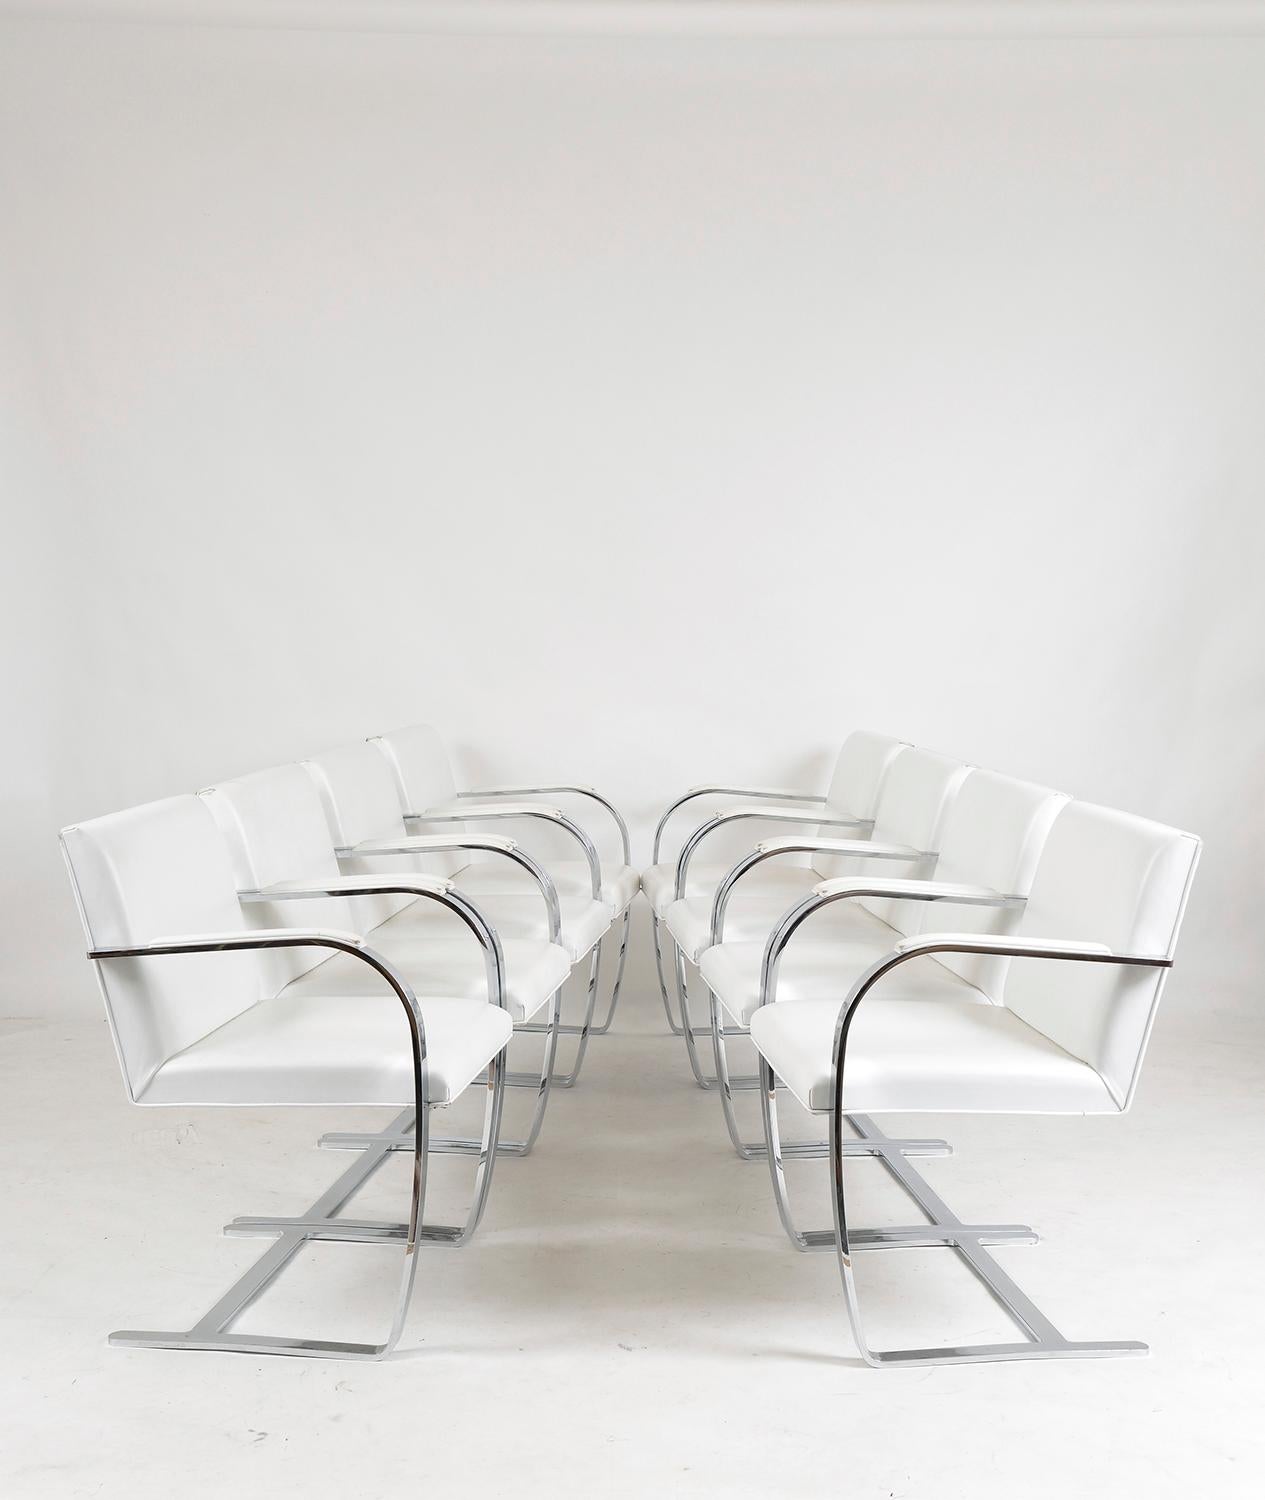 Celebrated for its lean profile and clean lines, the Brno chair was designed by Mies van der Rohe in the 1930s, and is an icon of 20th-century design. This is a rare opportunity to acquire a set of eight vintage Brno chairs with a flat bar steel